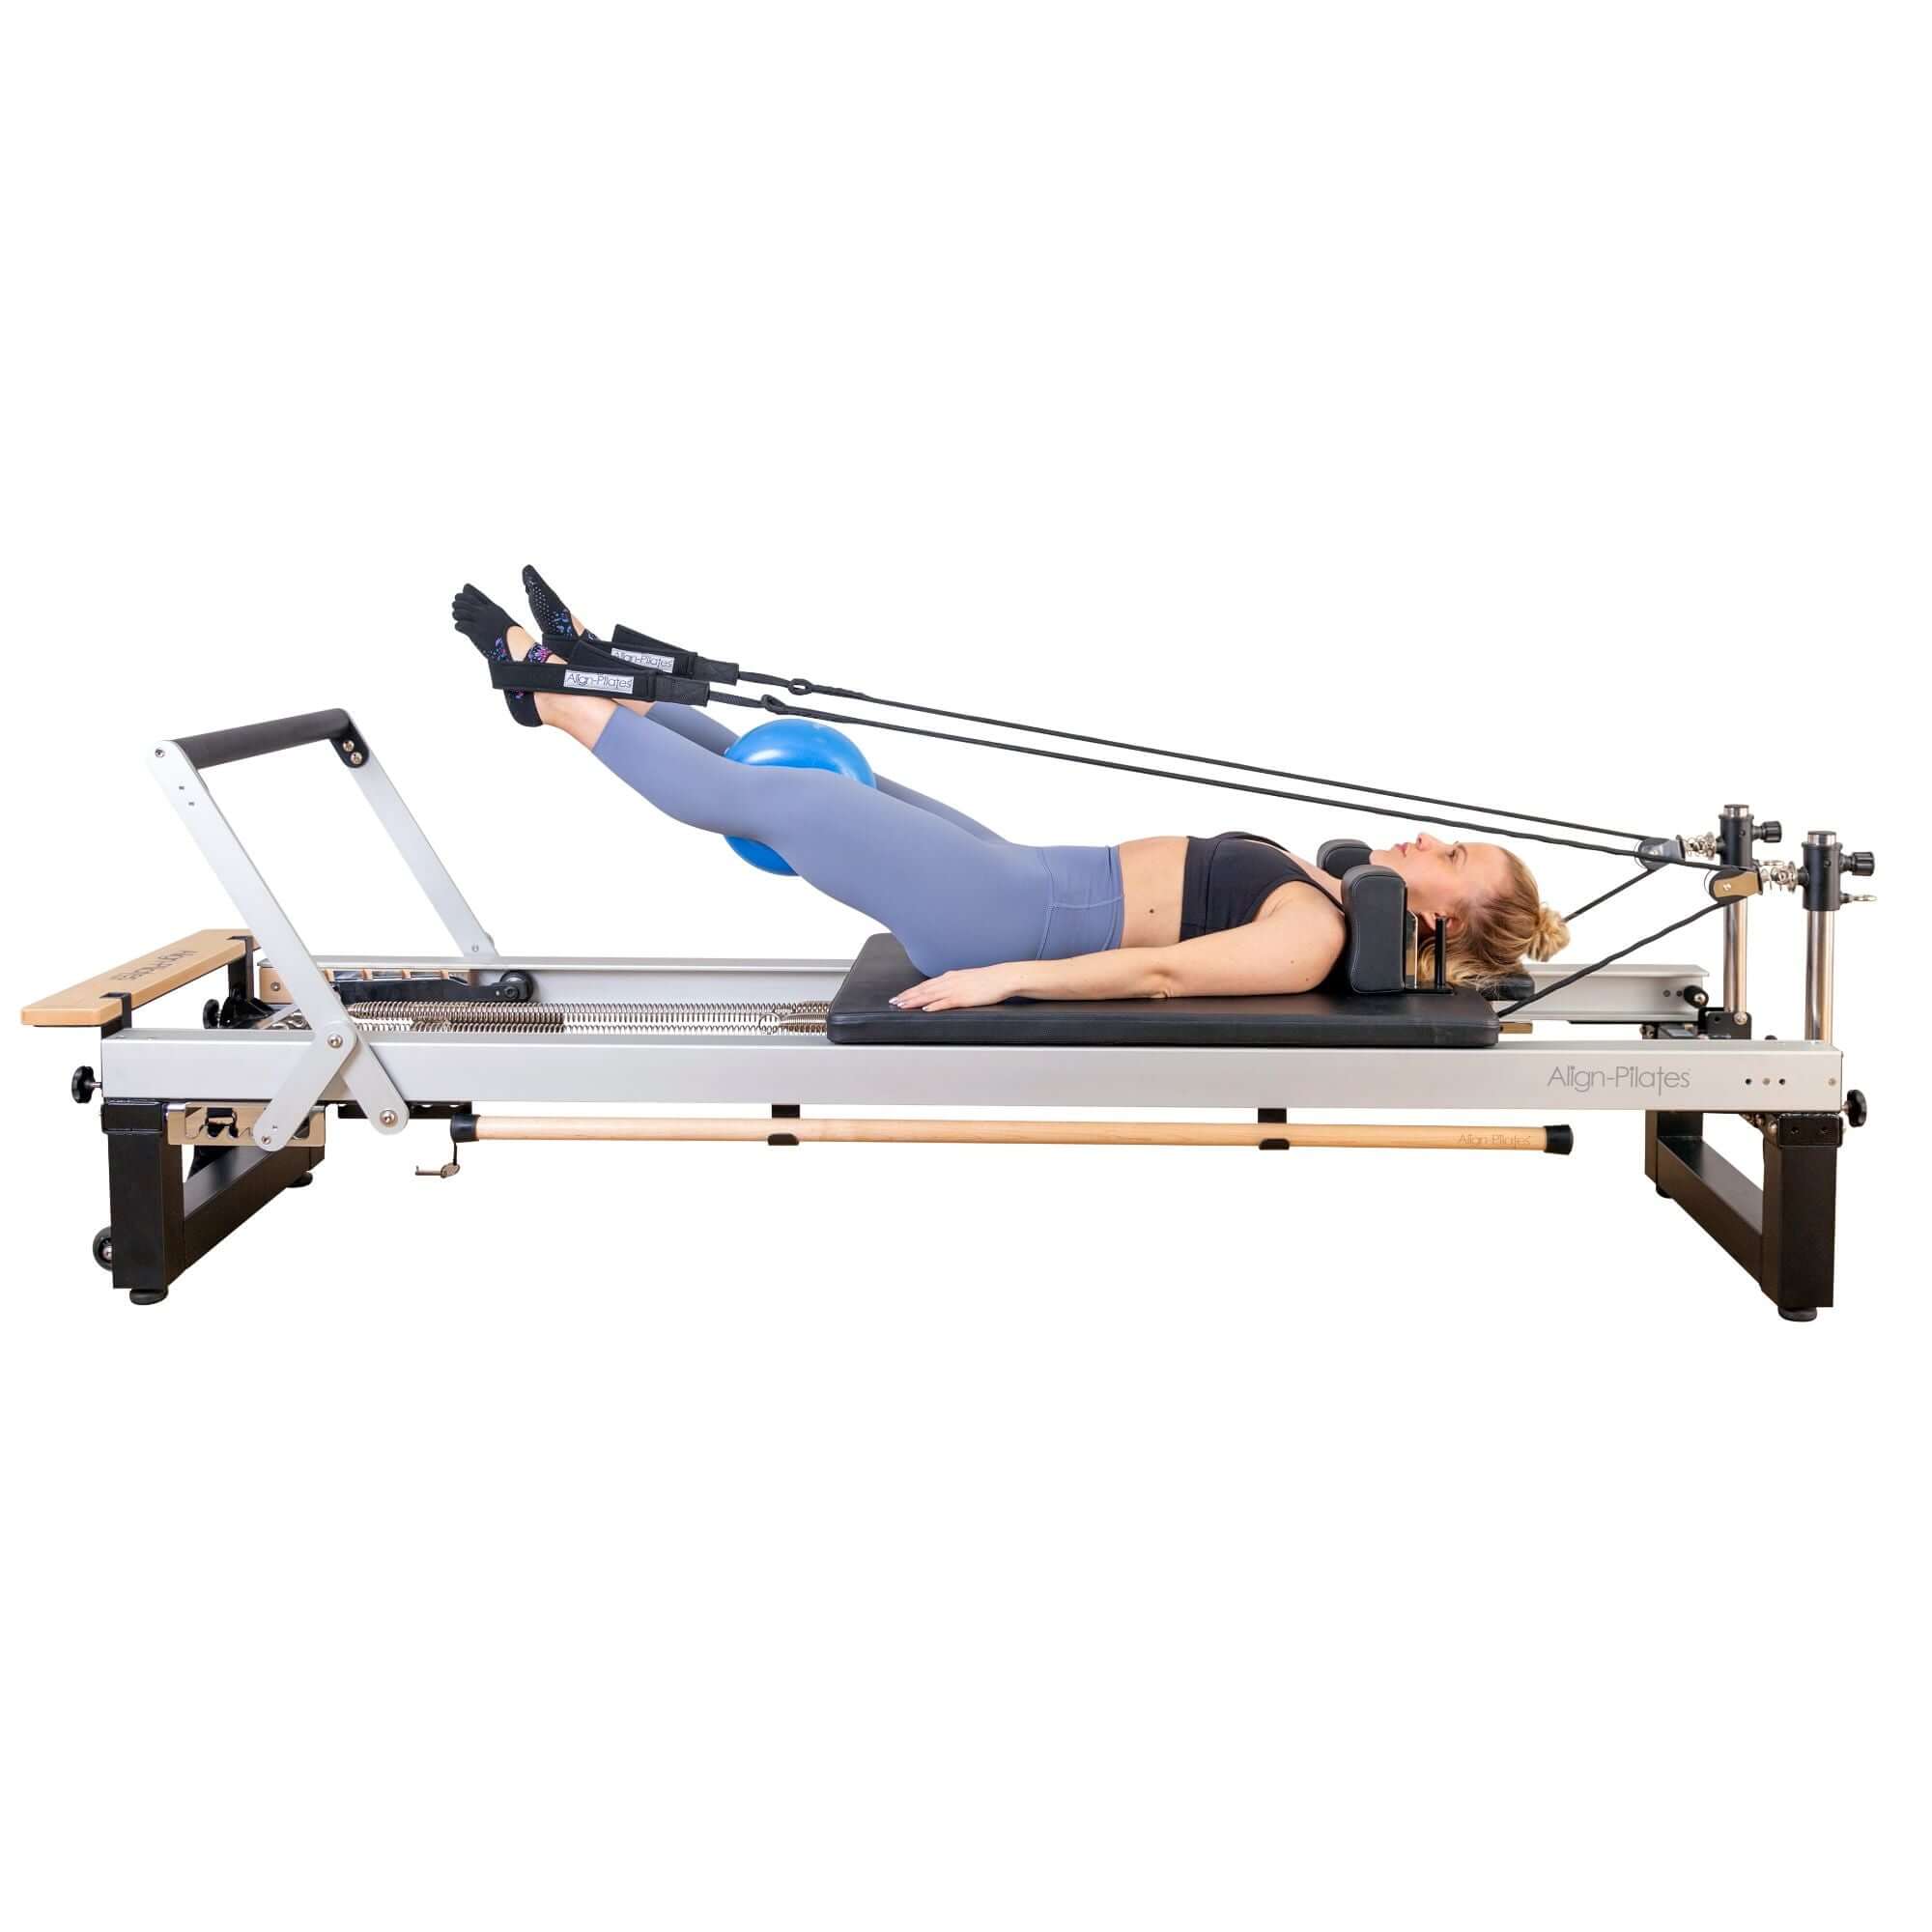 Instructor demonstrating a Pilates move on the Align Pilates A8 Pro Reformer, highlighting its ergonomic design.